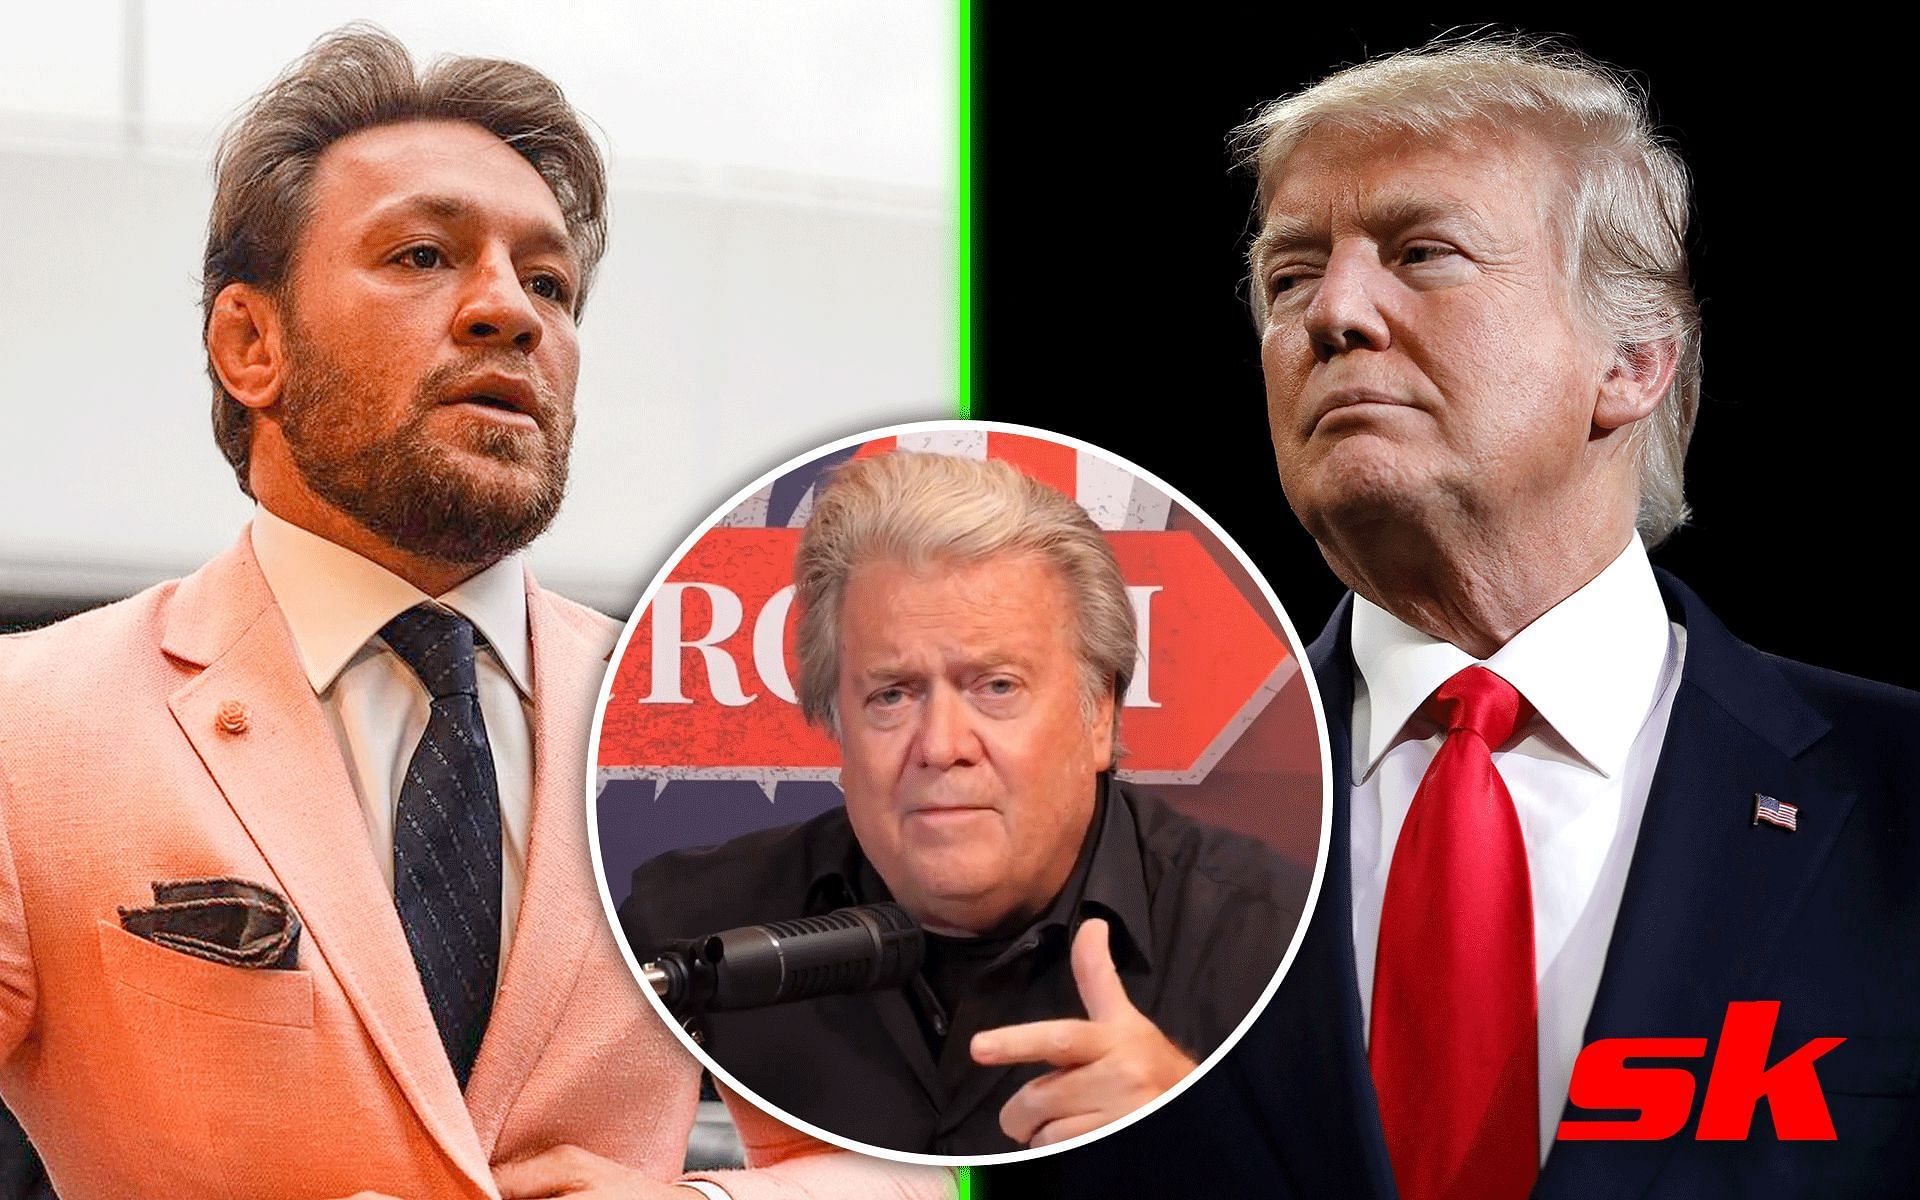 Conor McGregor, Steve Bannon and Donald Trump [Image via: Getty Images, @thenotoriousmma on Instagram and @TuckerCarlson on Twitter] 